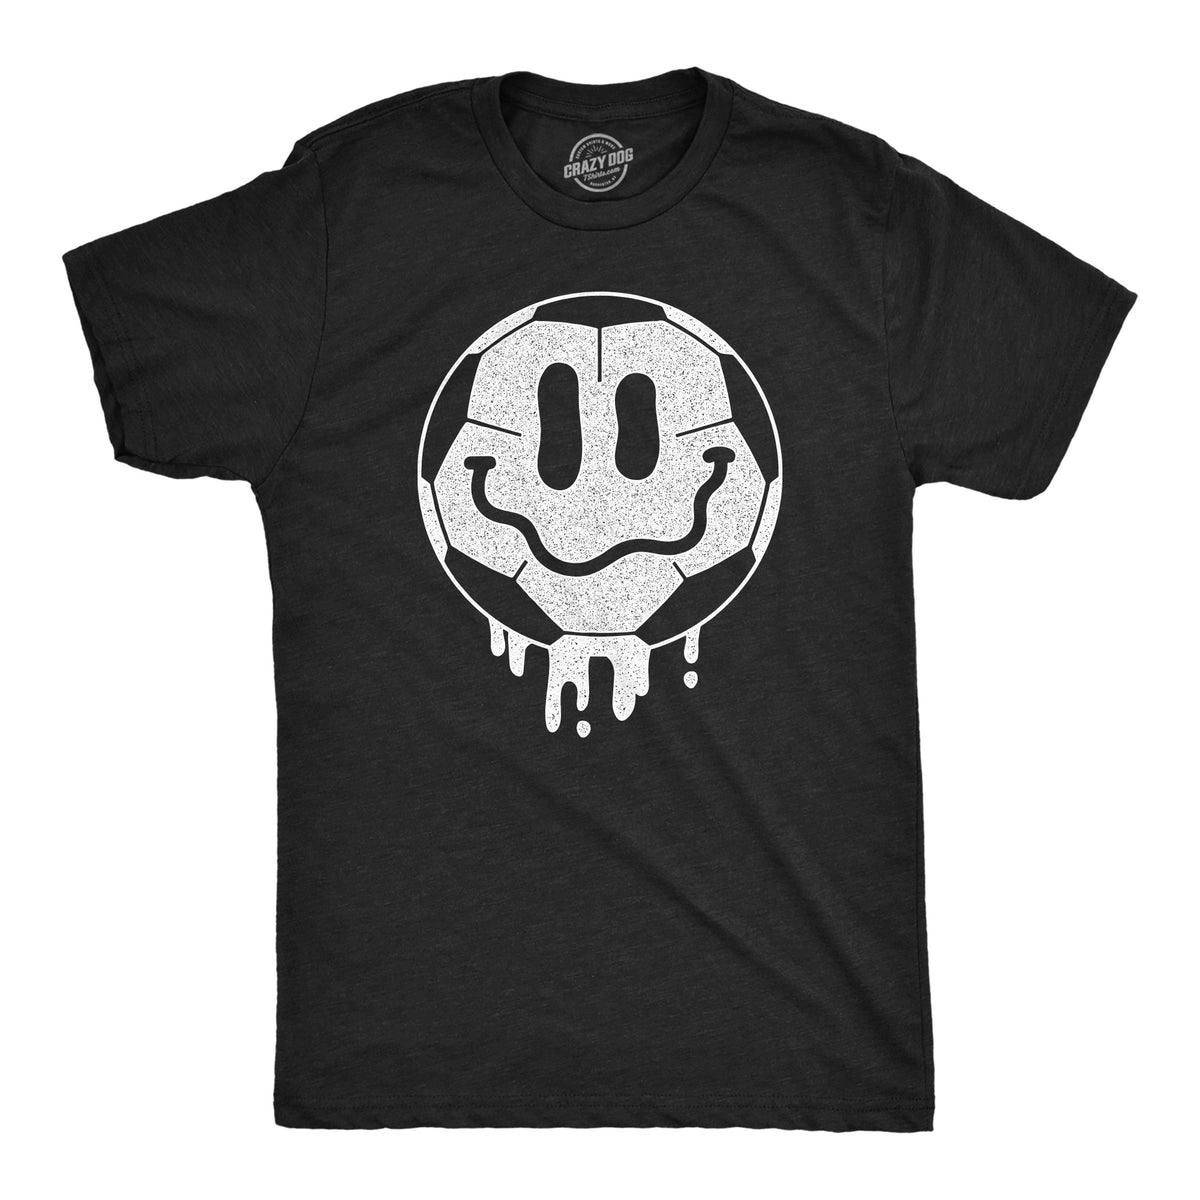 Funny Heather Black - Dripping Soccer Ball Smile Dripping Soccer Ball Smile Mens T Shirt Nerdy Soccer Tee